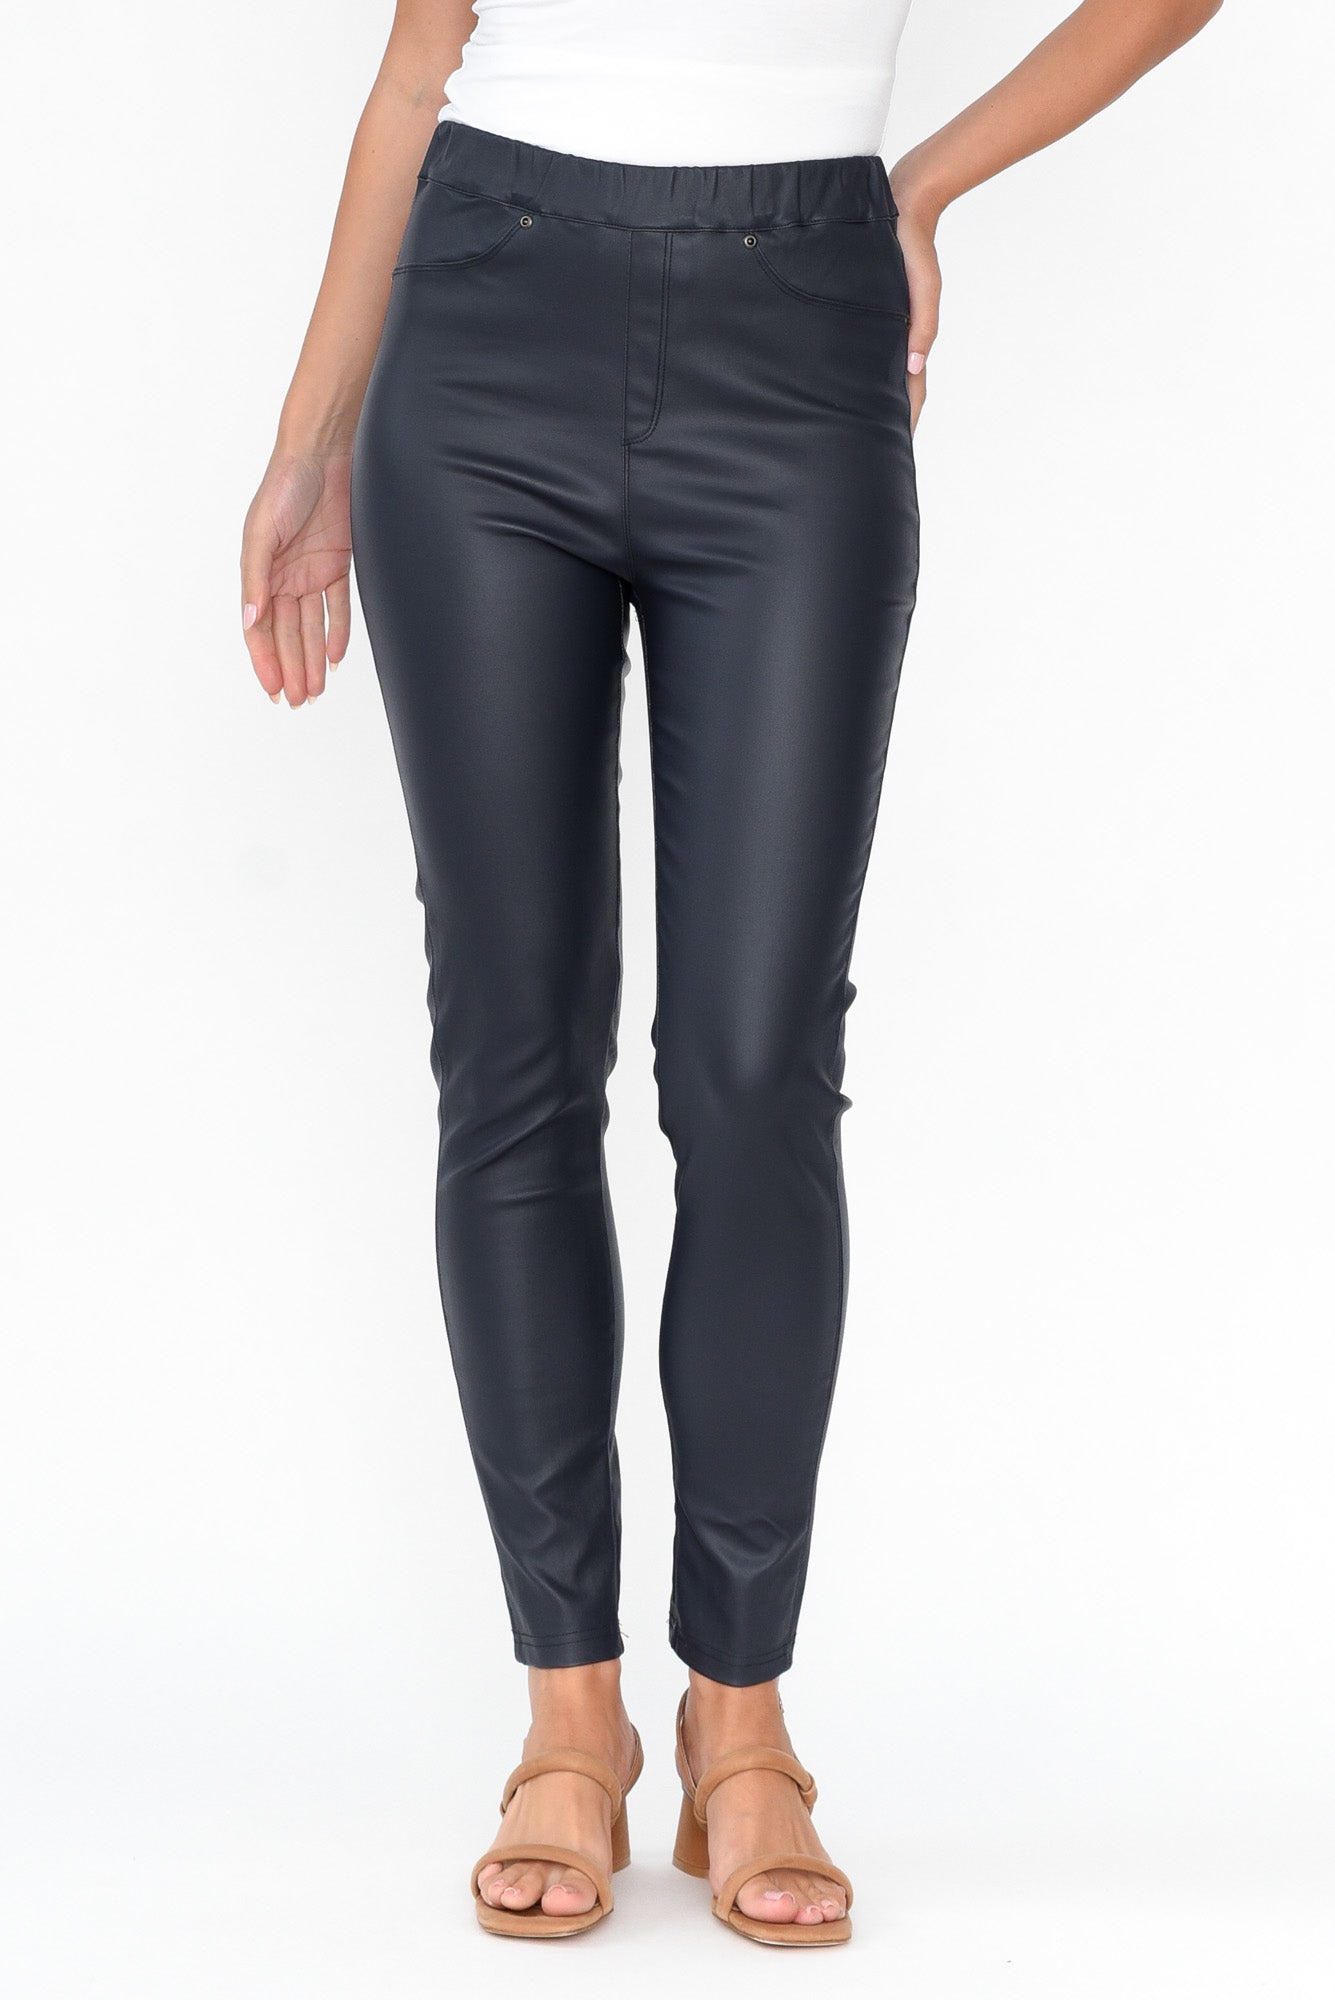 The Wet Look Pants  The perfect pant to add a little edge and eleganc   Warwick Jones